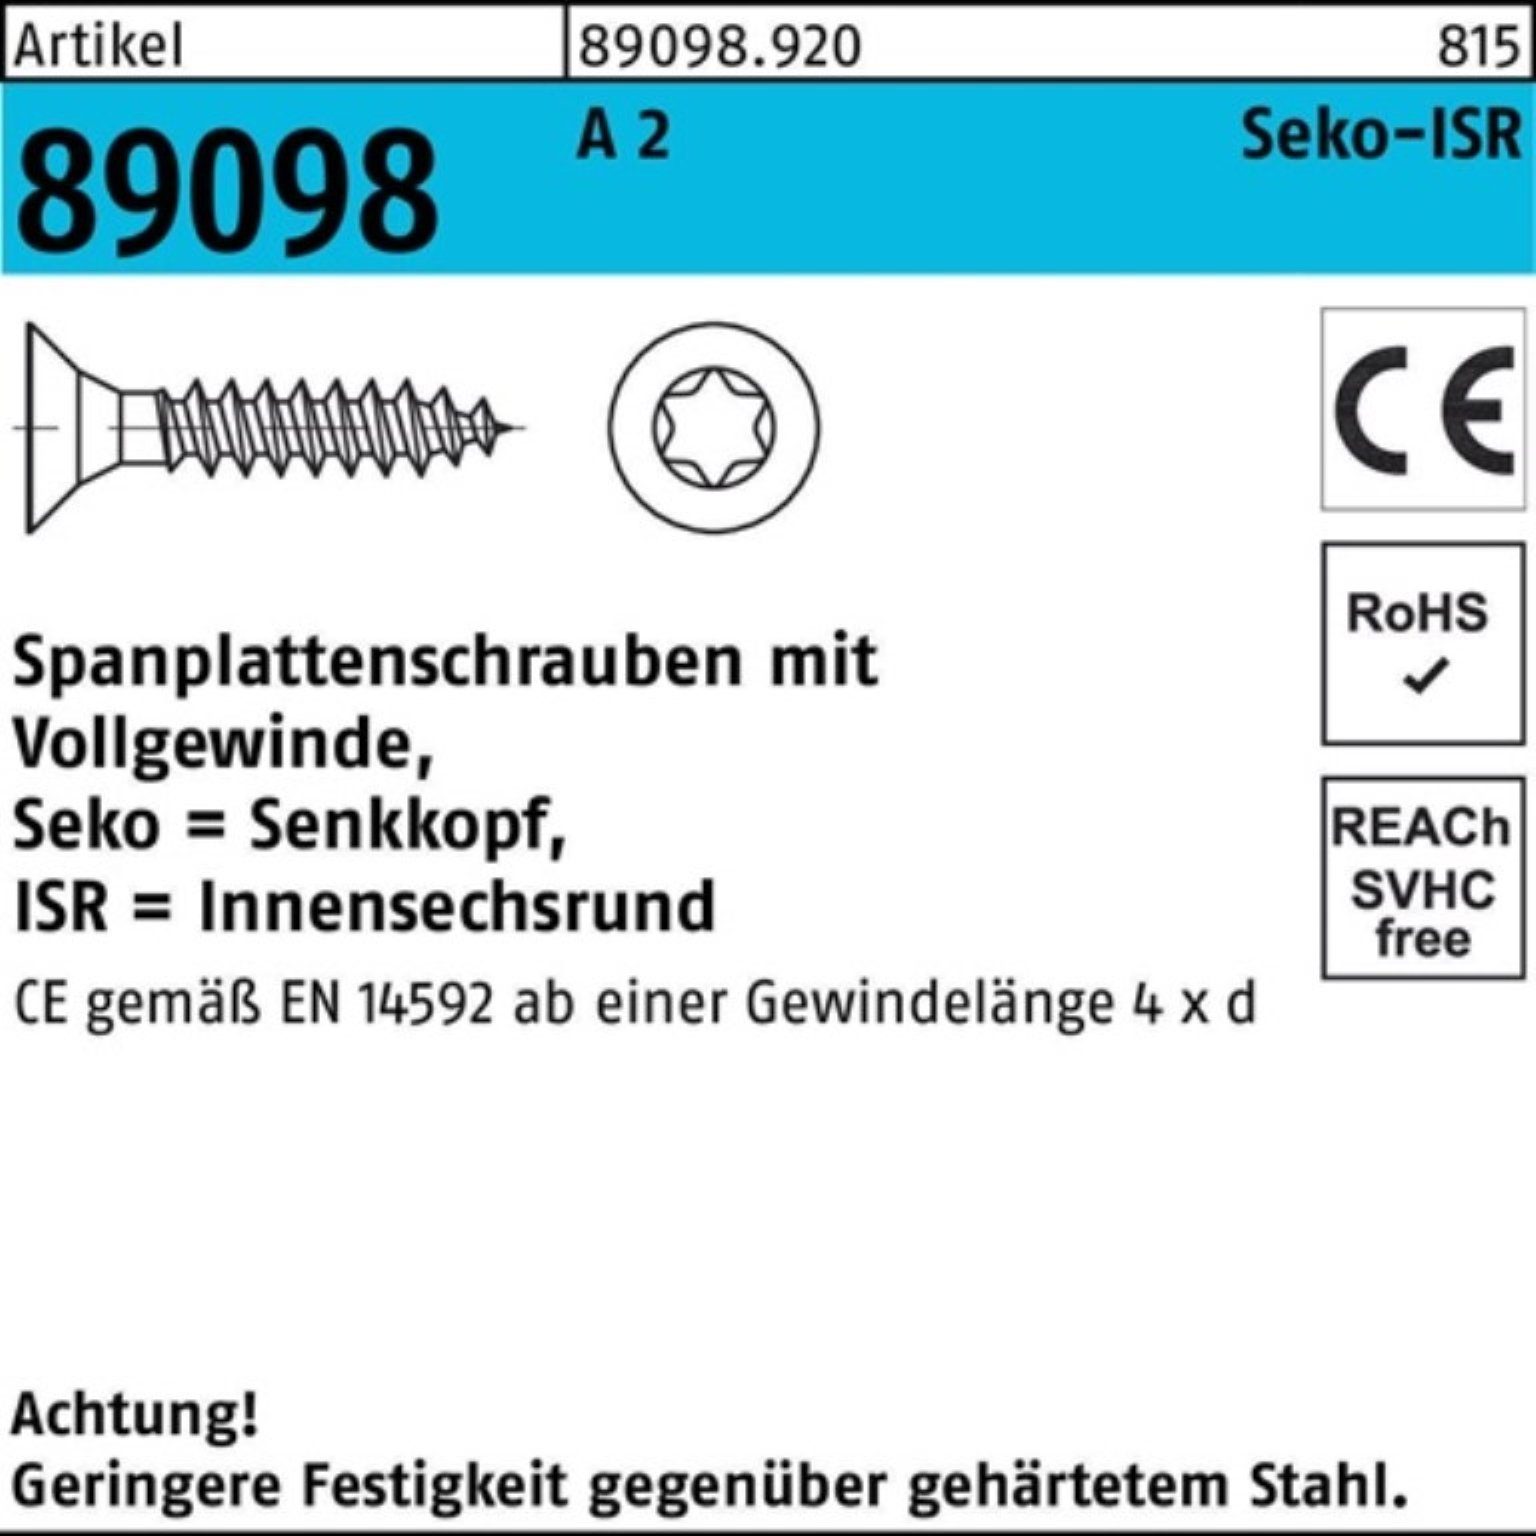 Pack 50-T20 89098 4x VG 200 S A 2 ISR 200er Reyher Spanplattenschraube SEKO R Spanplattenschraube